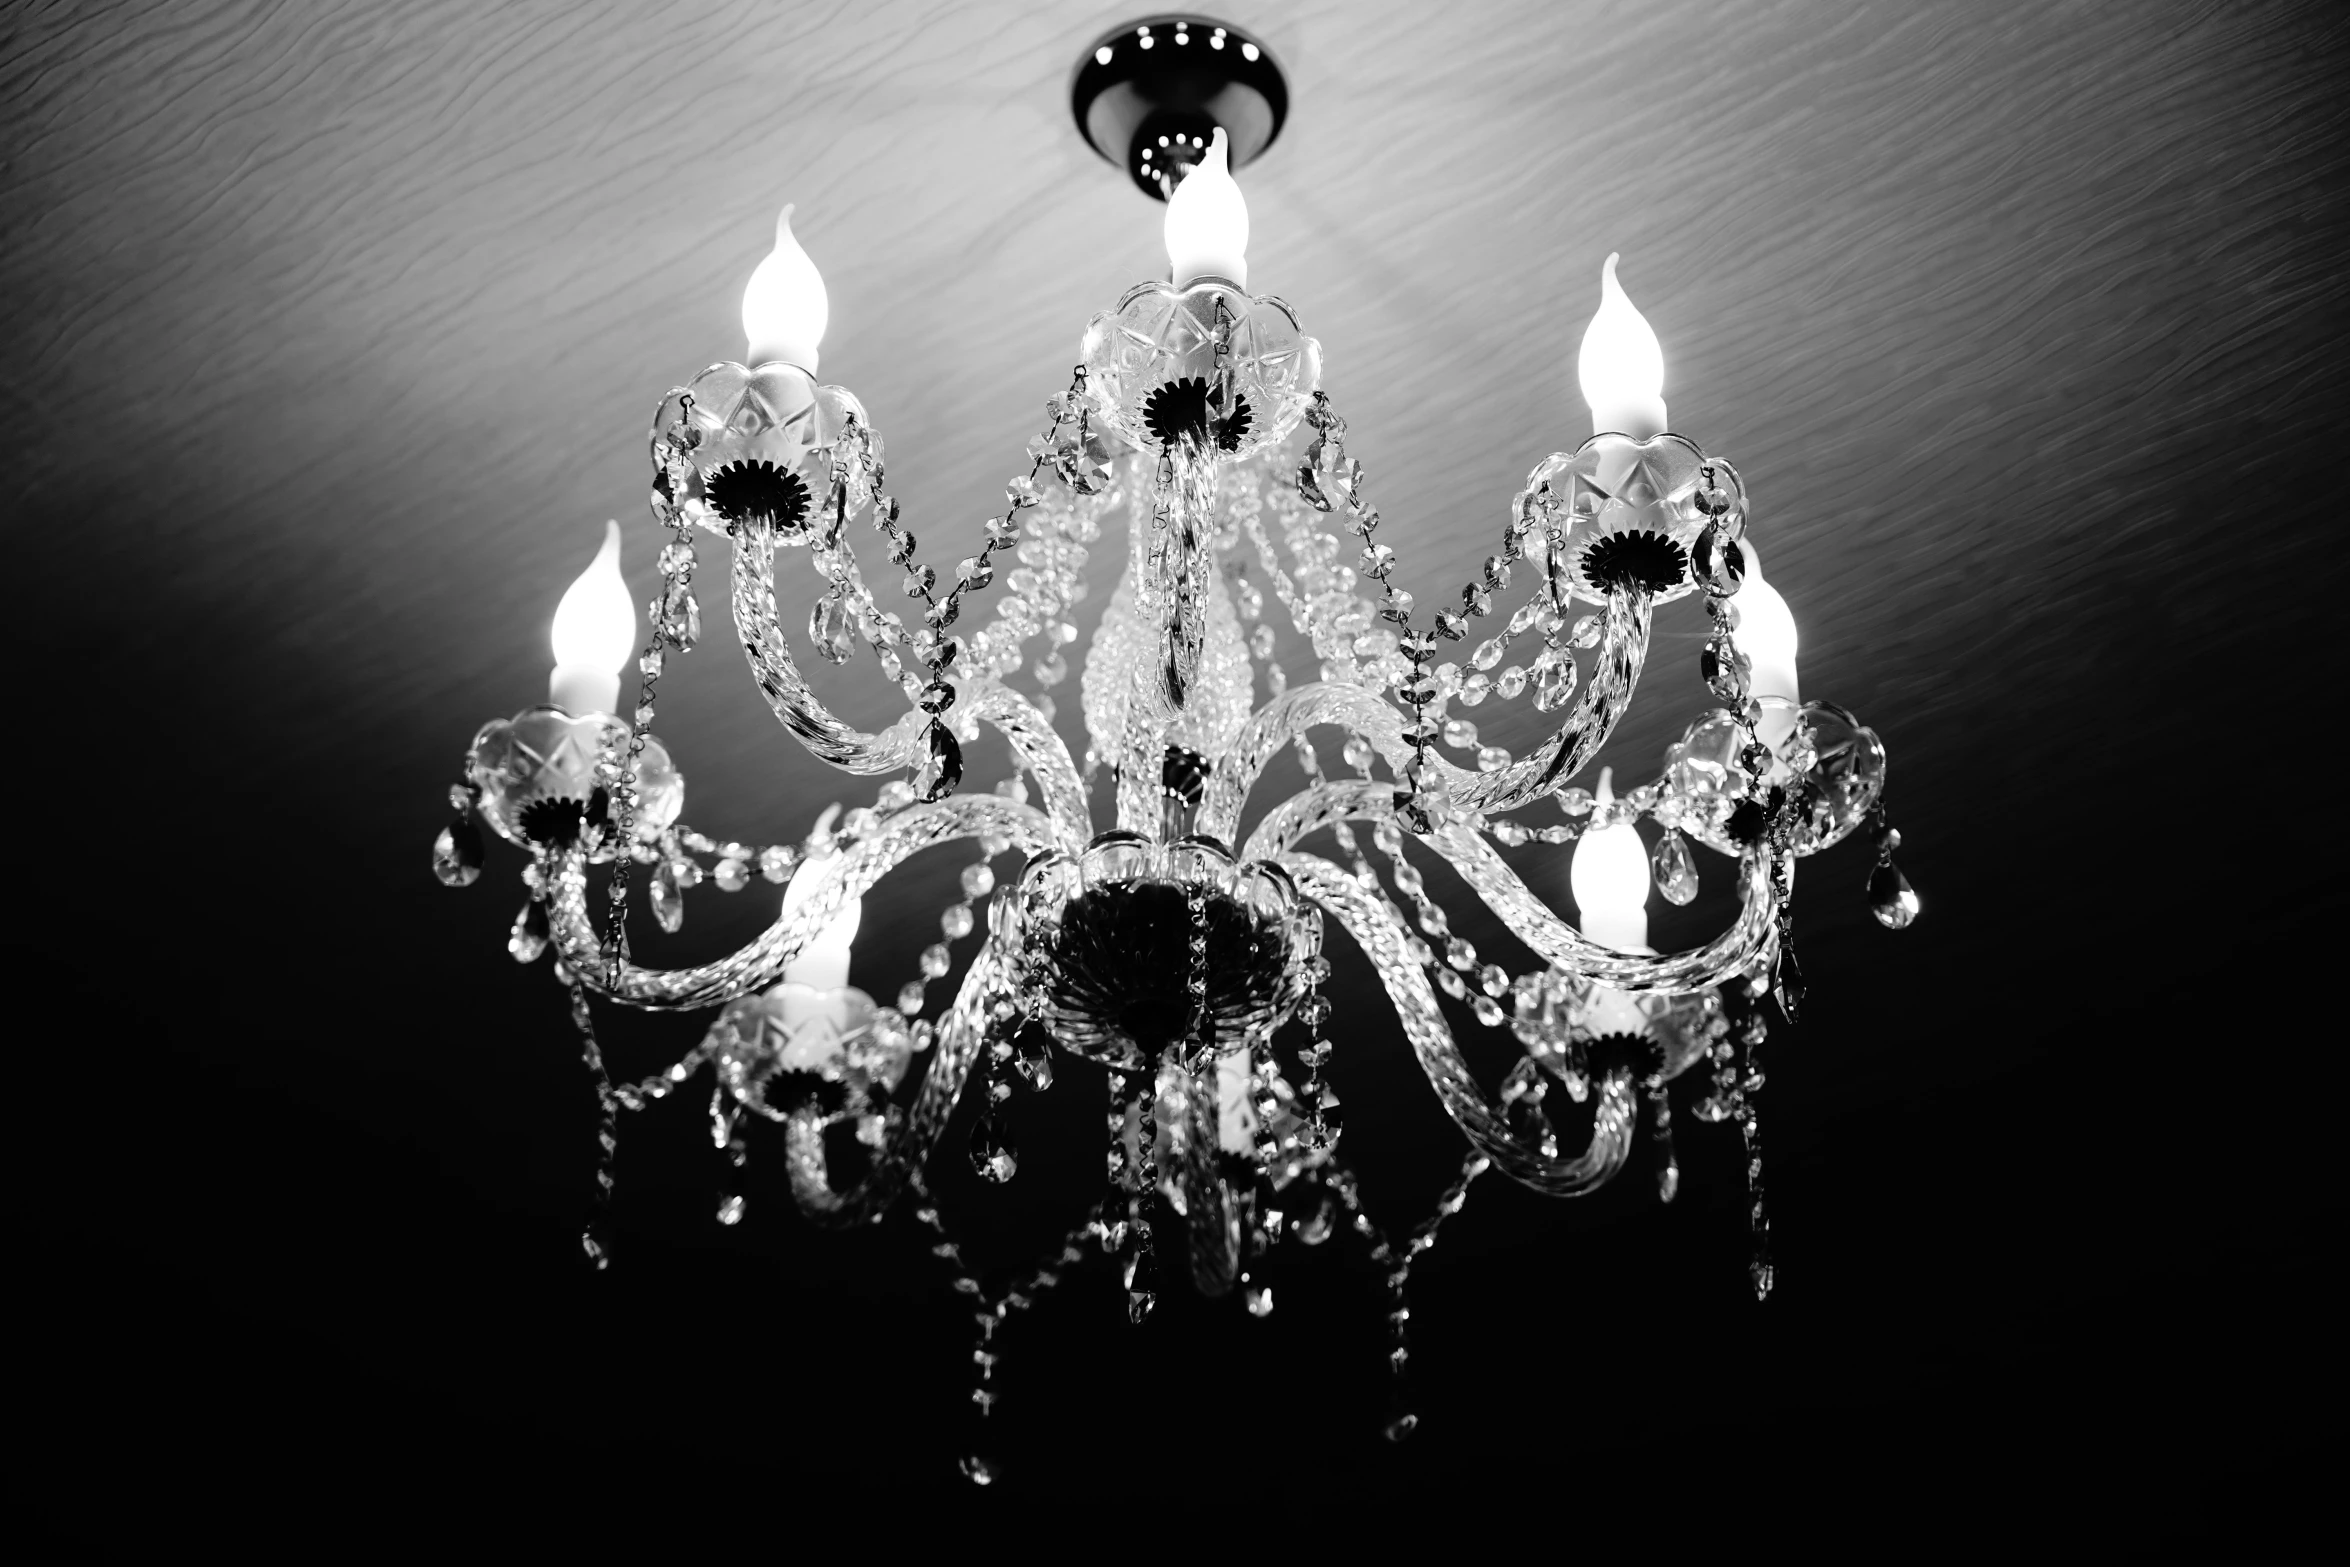 black and white po of a chandelier with five lit candles